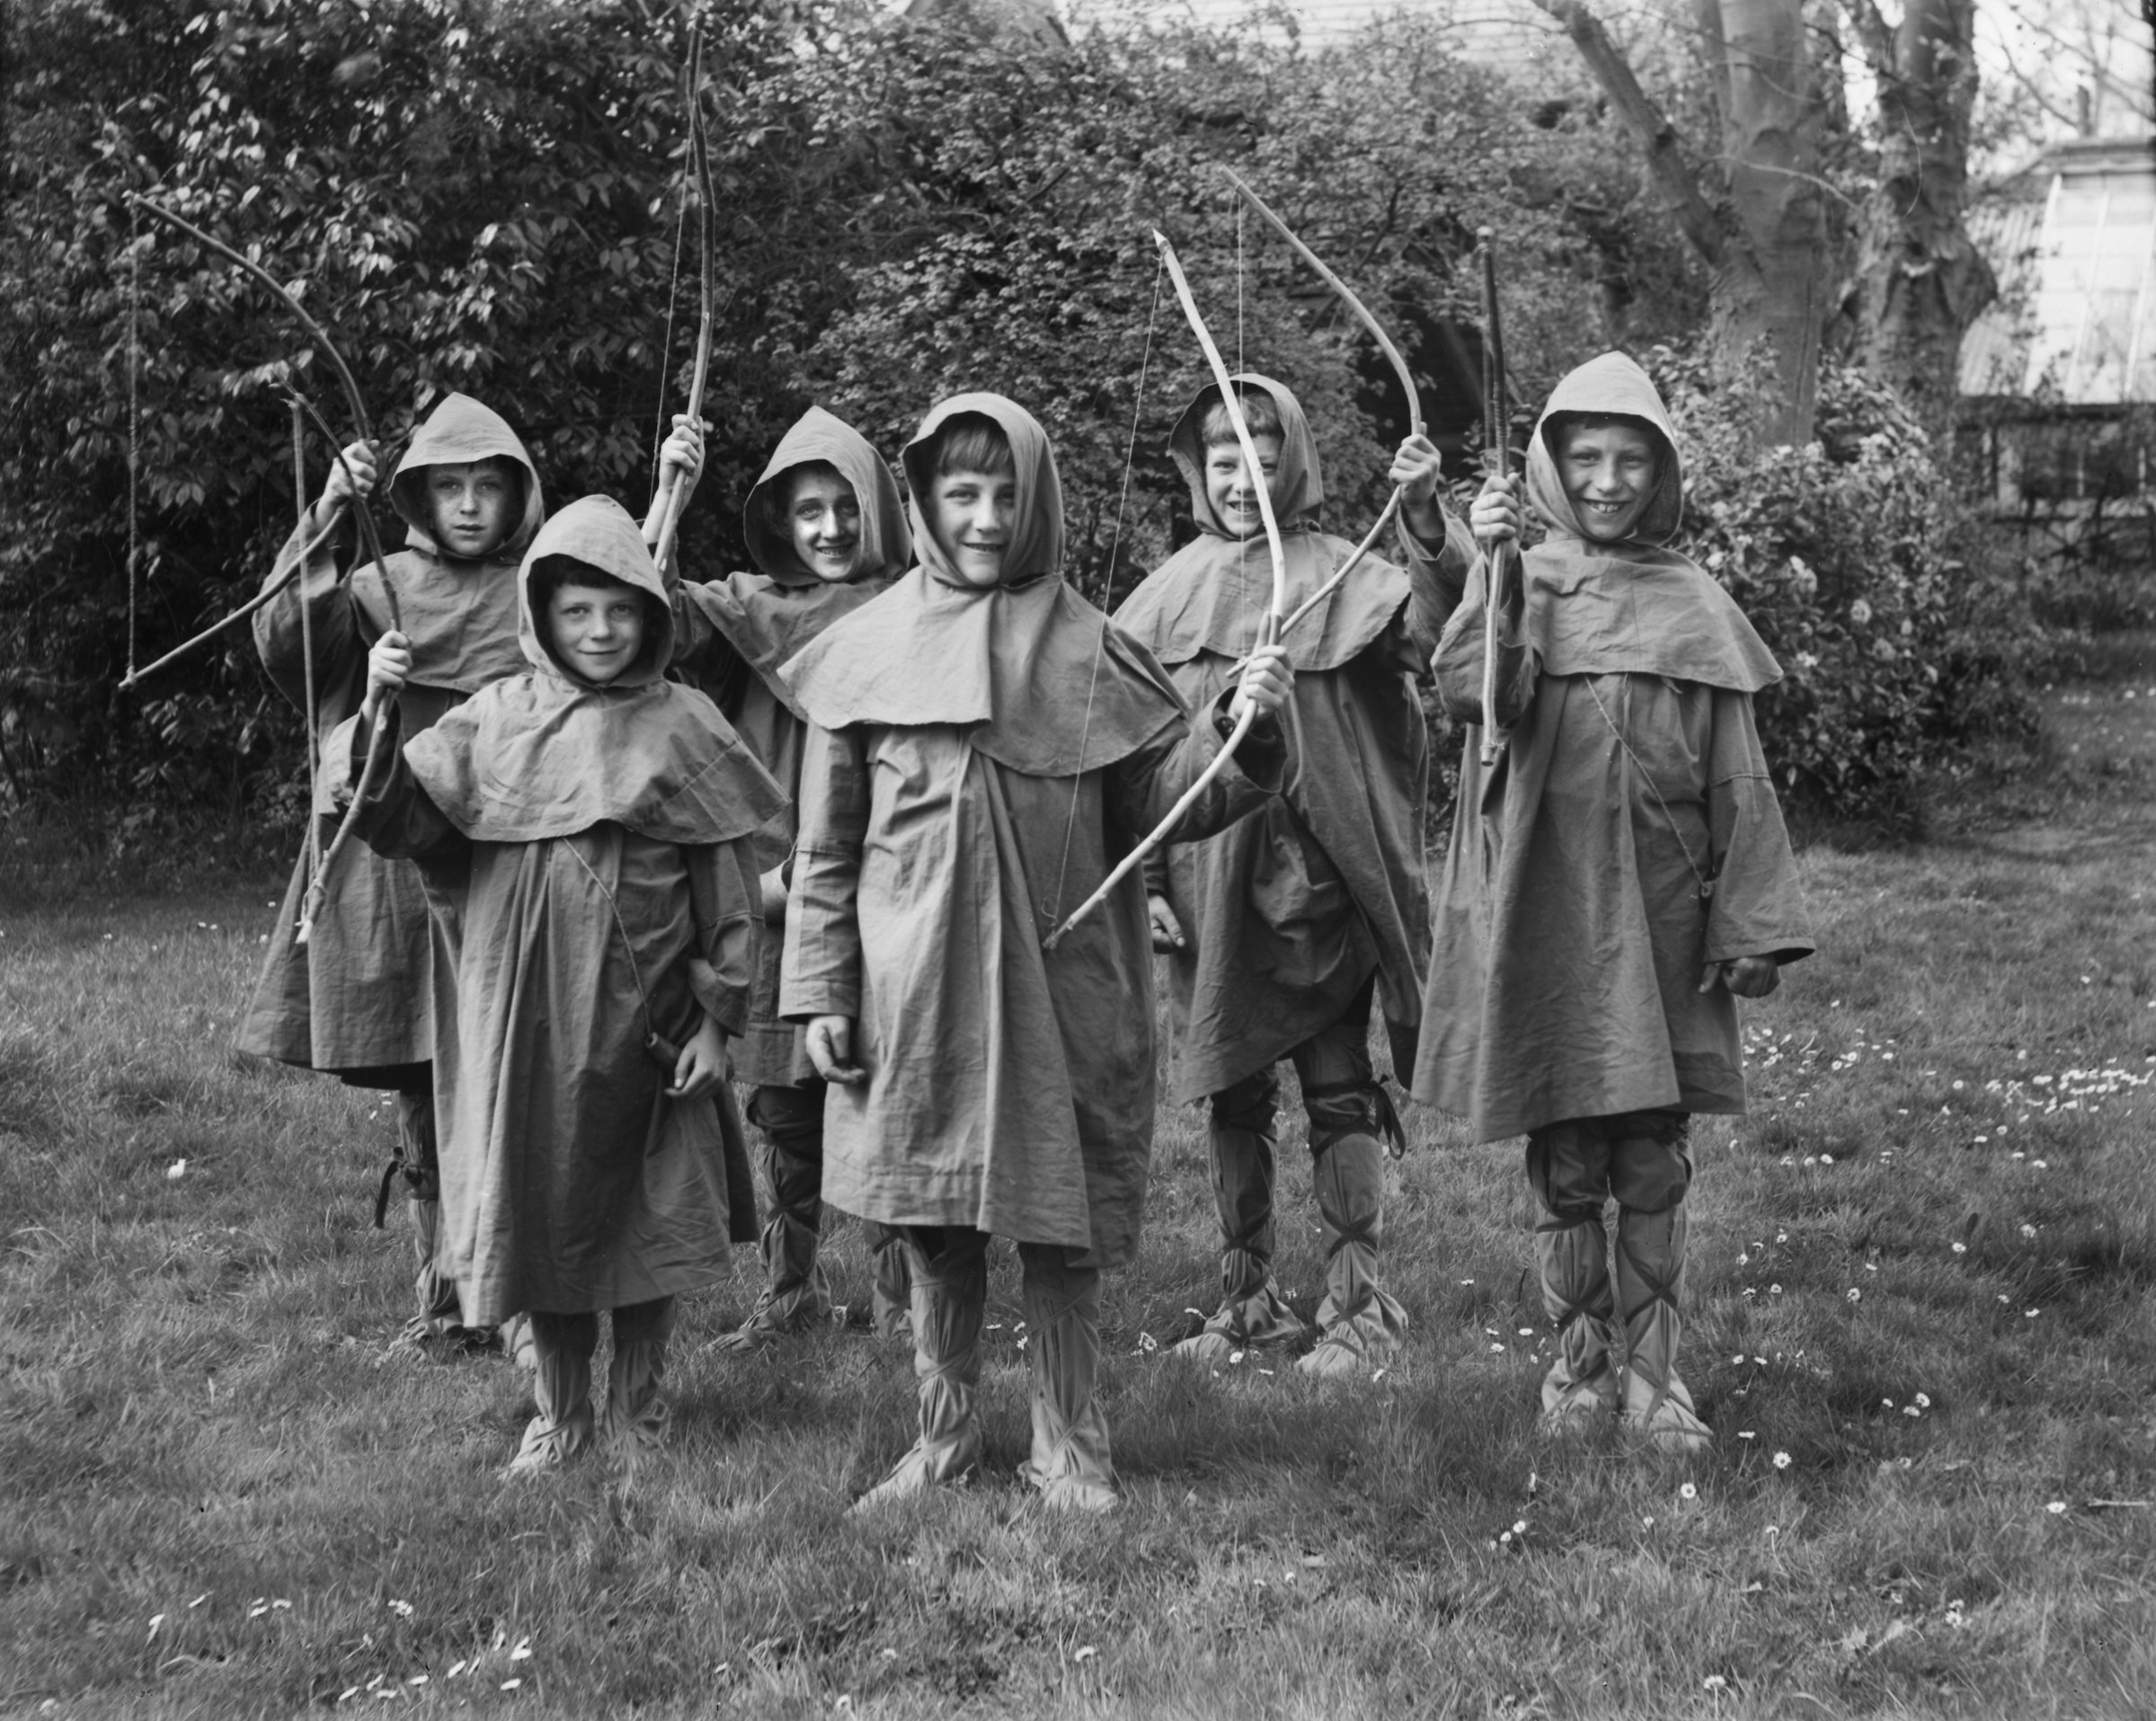 Young boys dressed up as Robin Hood in England, ca. 1920